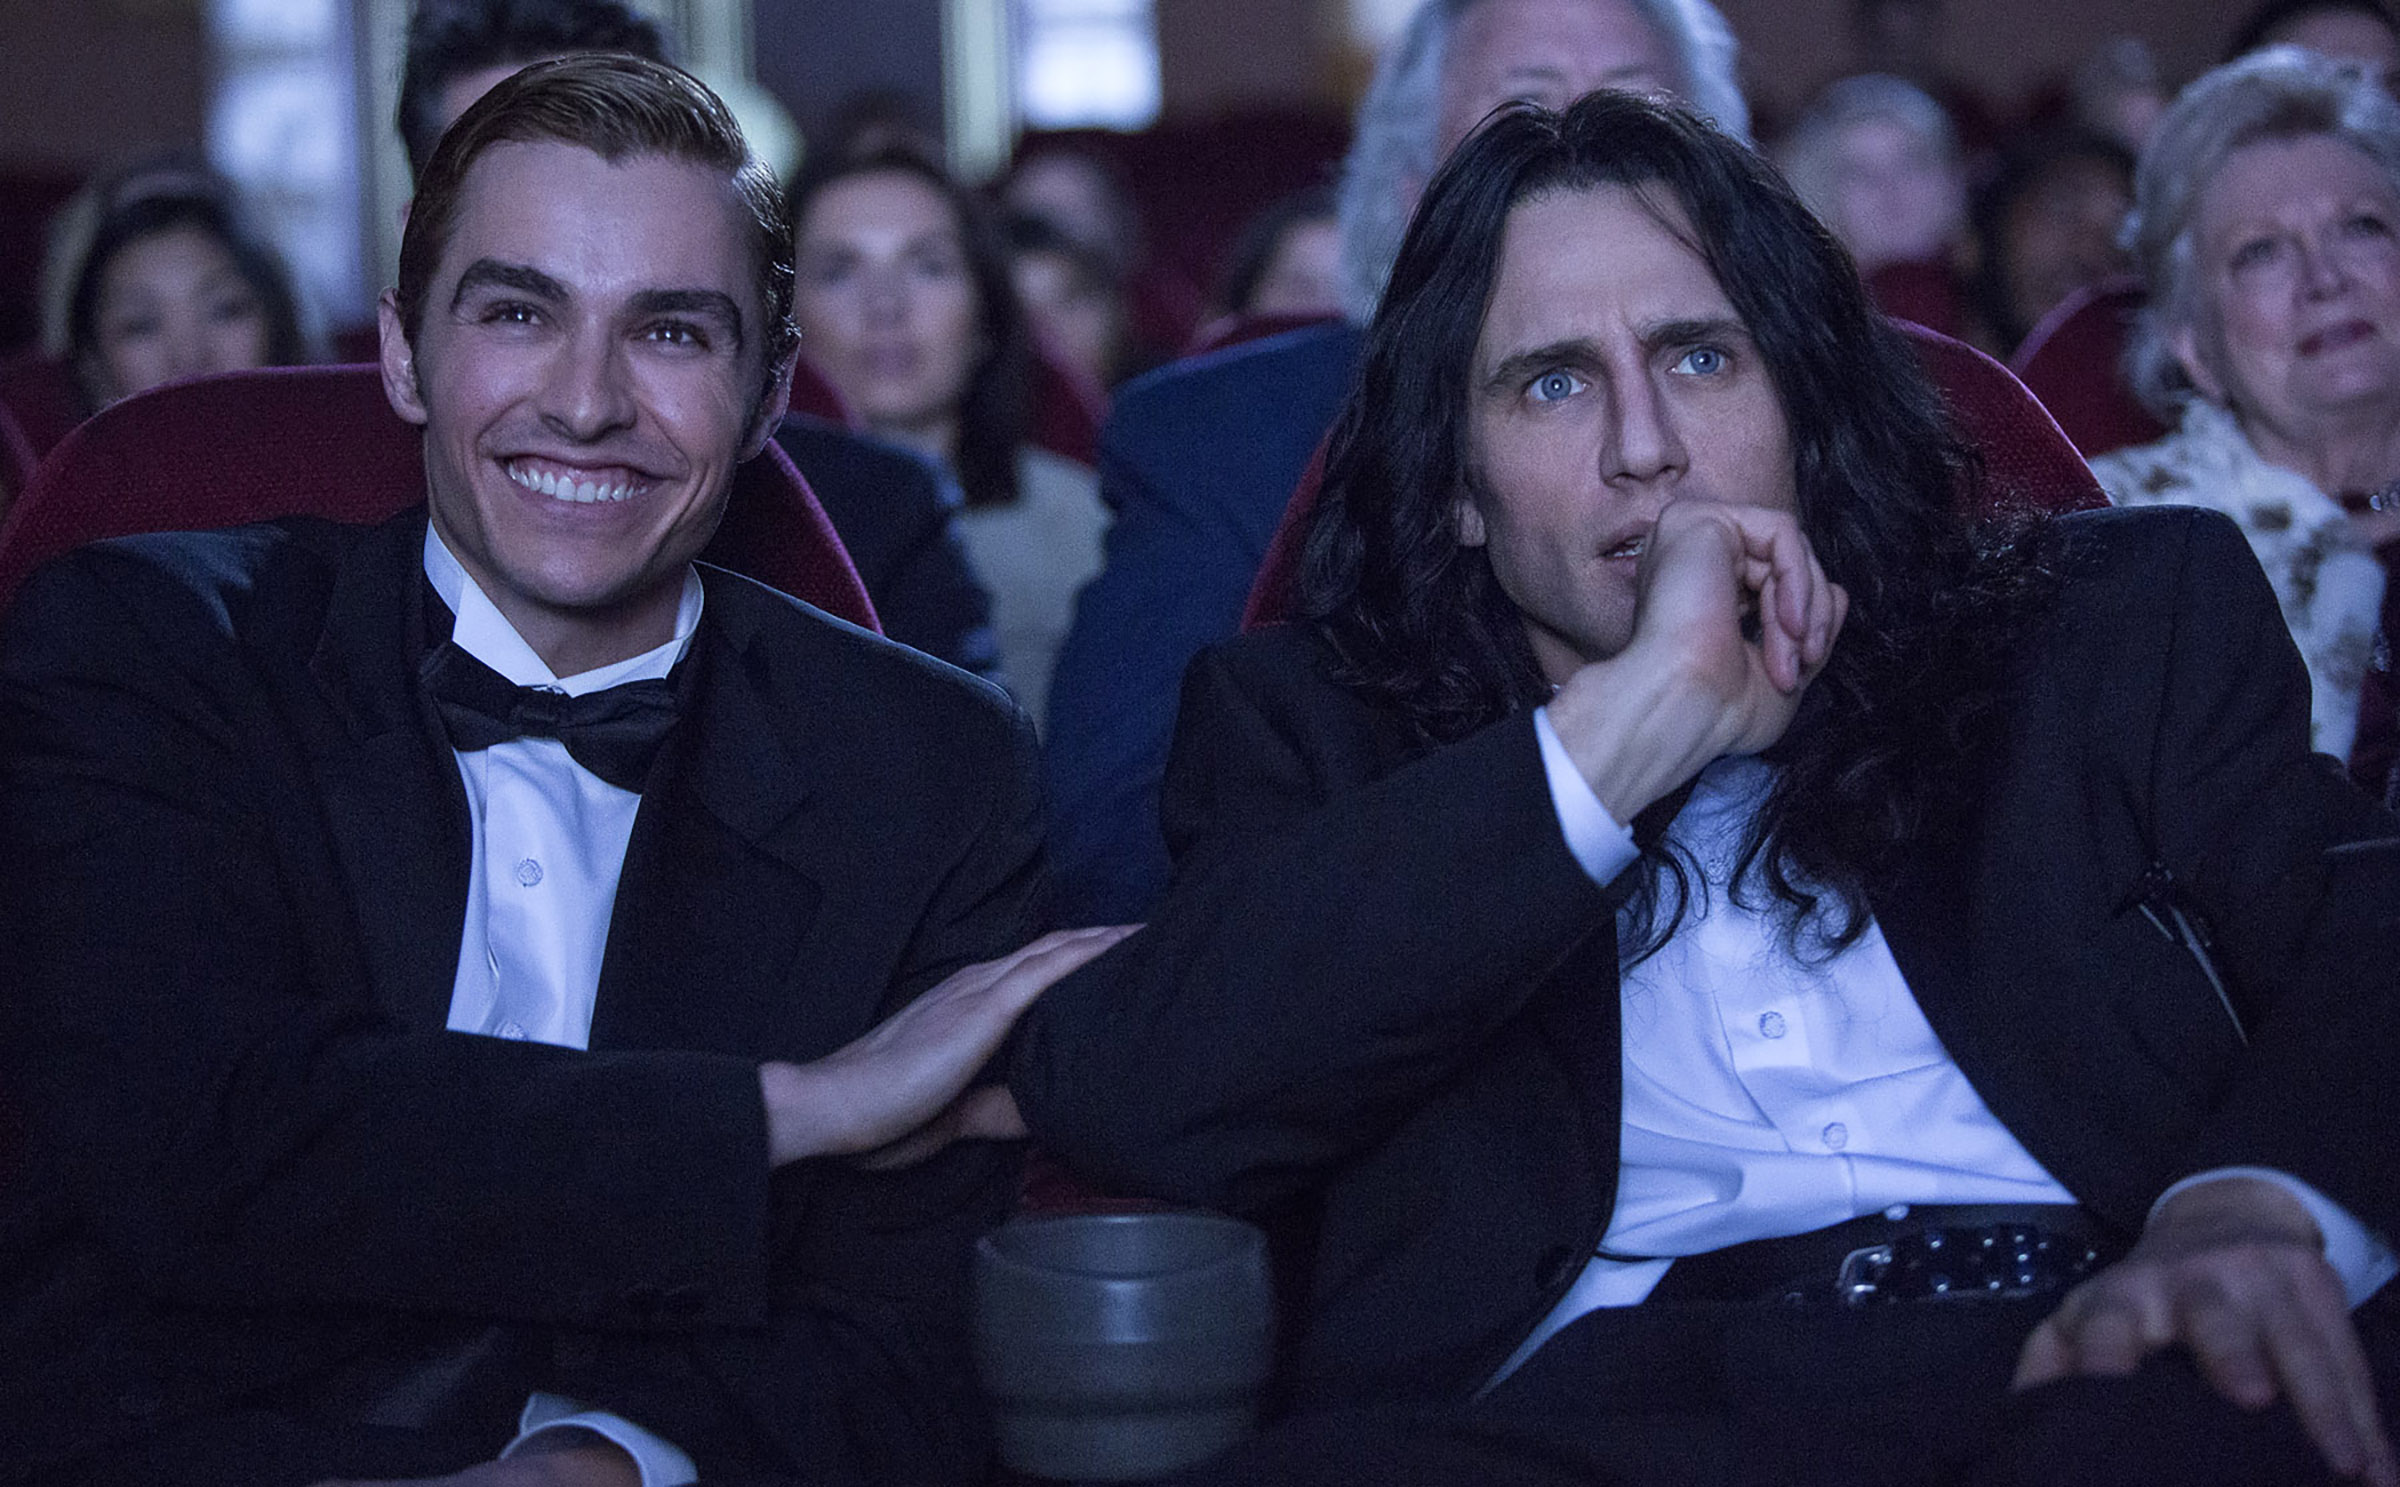 Dave Franco and James Franco as Greg Sestero and Tommy Wiseau in The Disaster Artist.